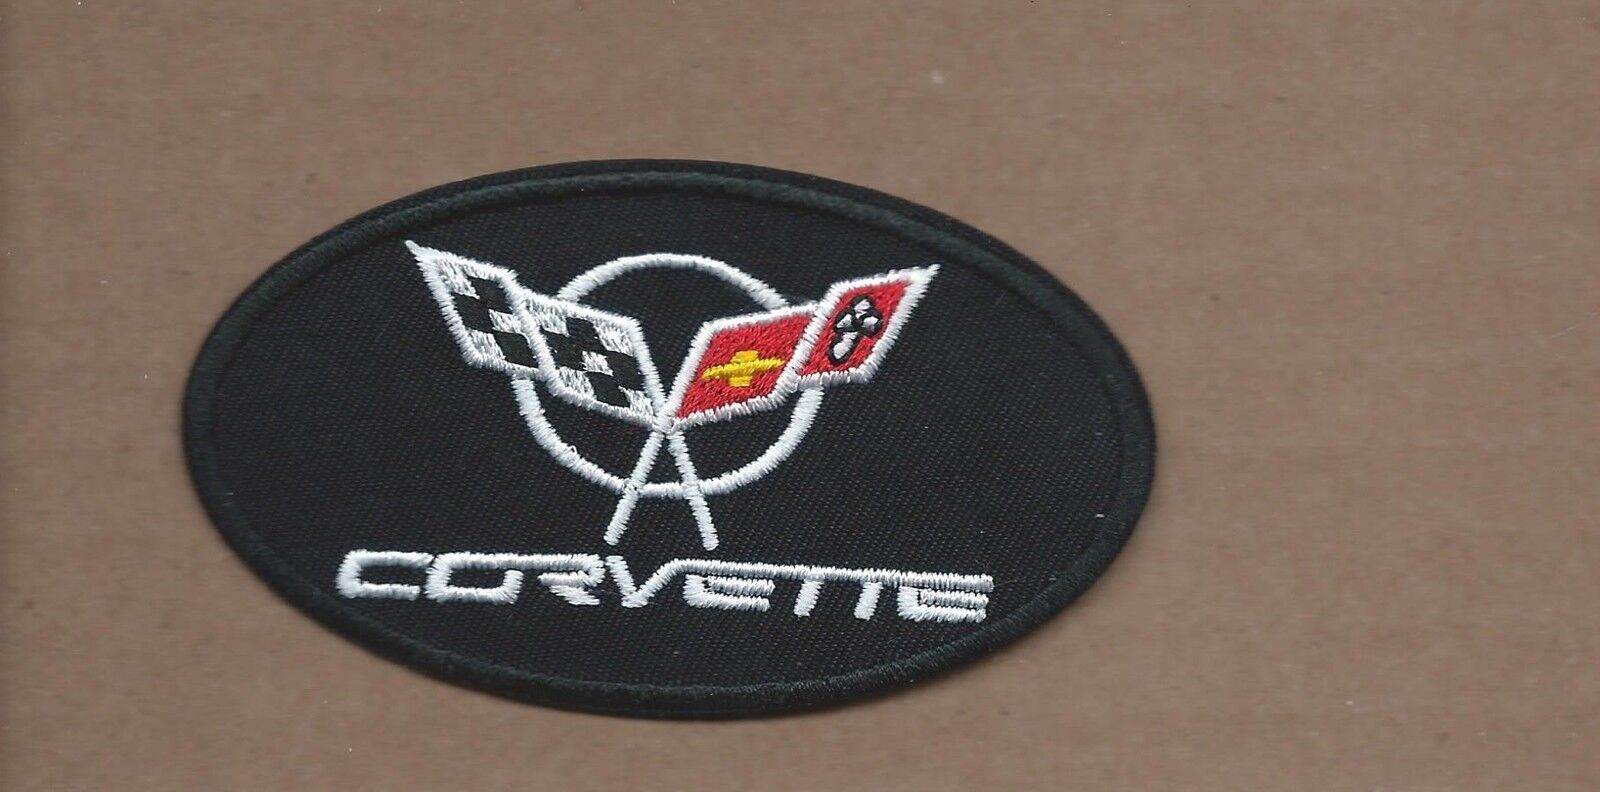 NEW 2 1/8 X 3 3/4 INCH CORVETTE IRON ON PATCH 